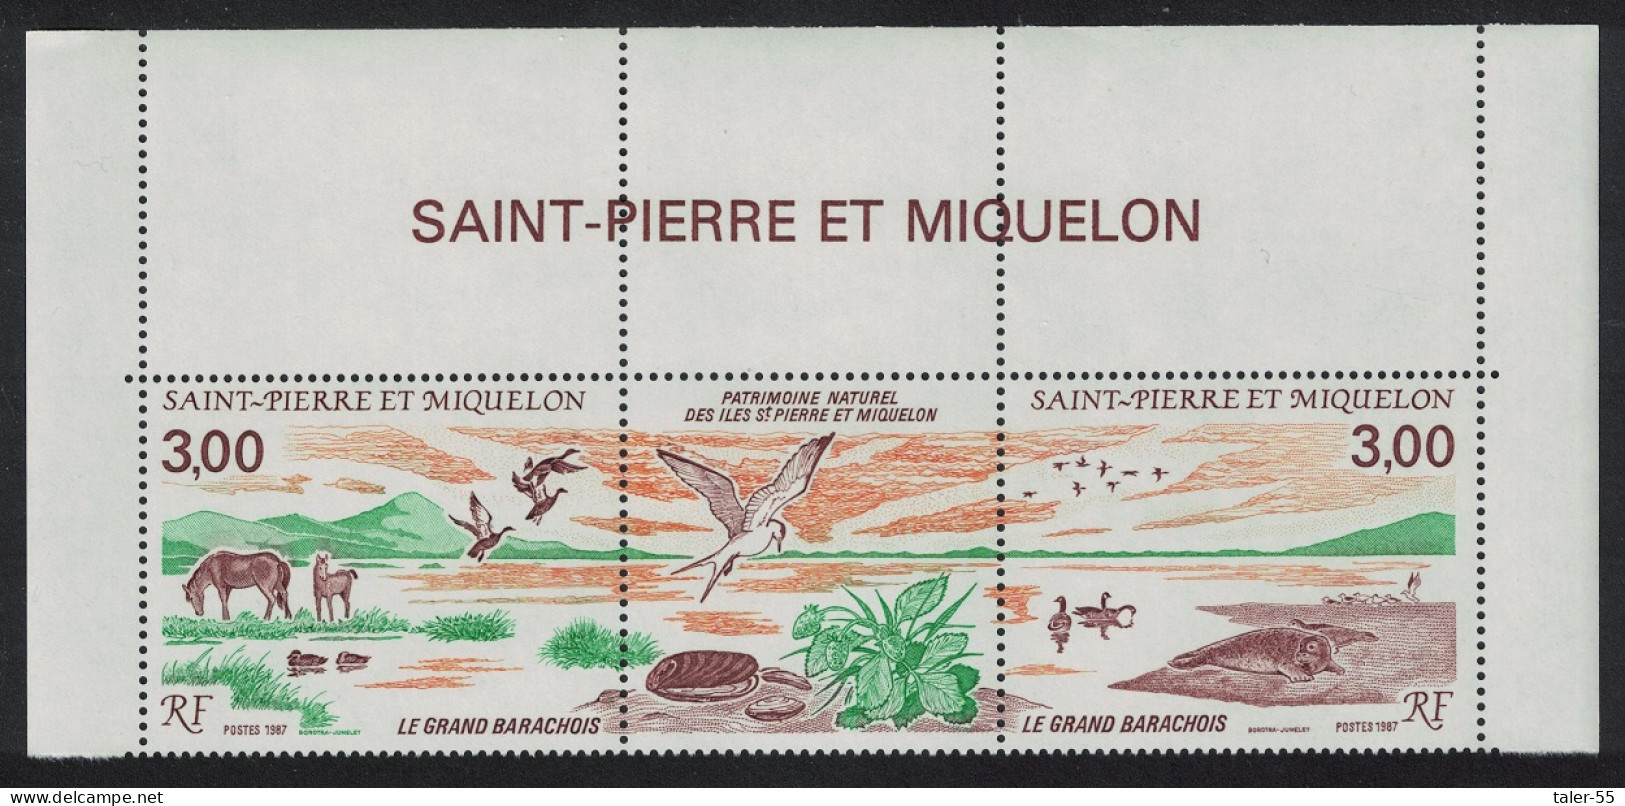 St. Pierre And Miquelon Horses Ducks Gulls Geese Birds 2v Top Strip 1987 MNH SG#596-597 - Unused Stamps